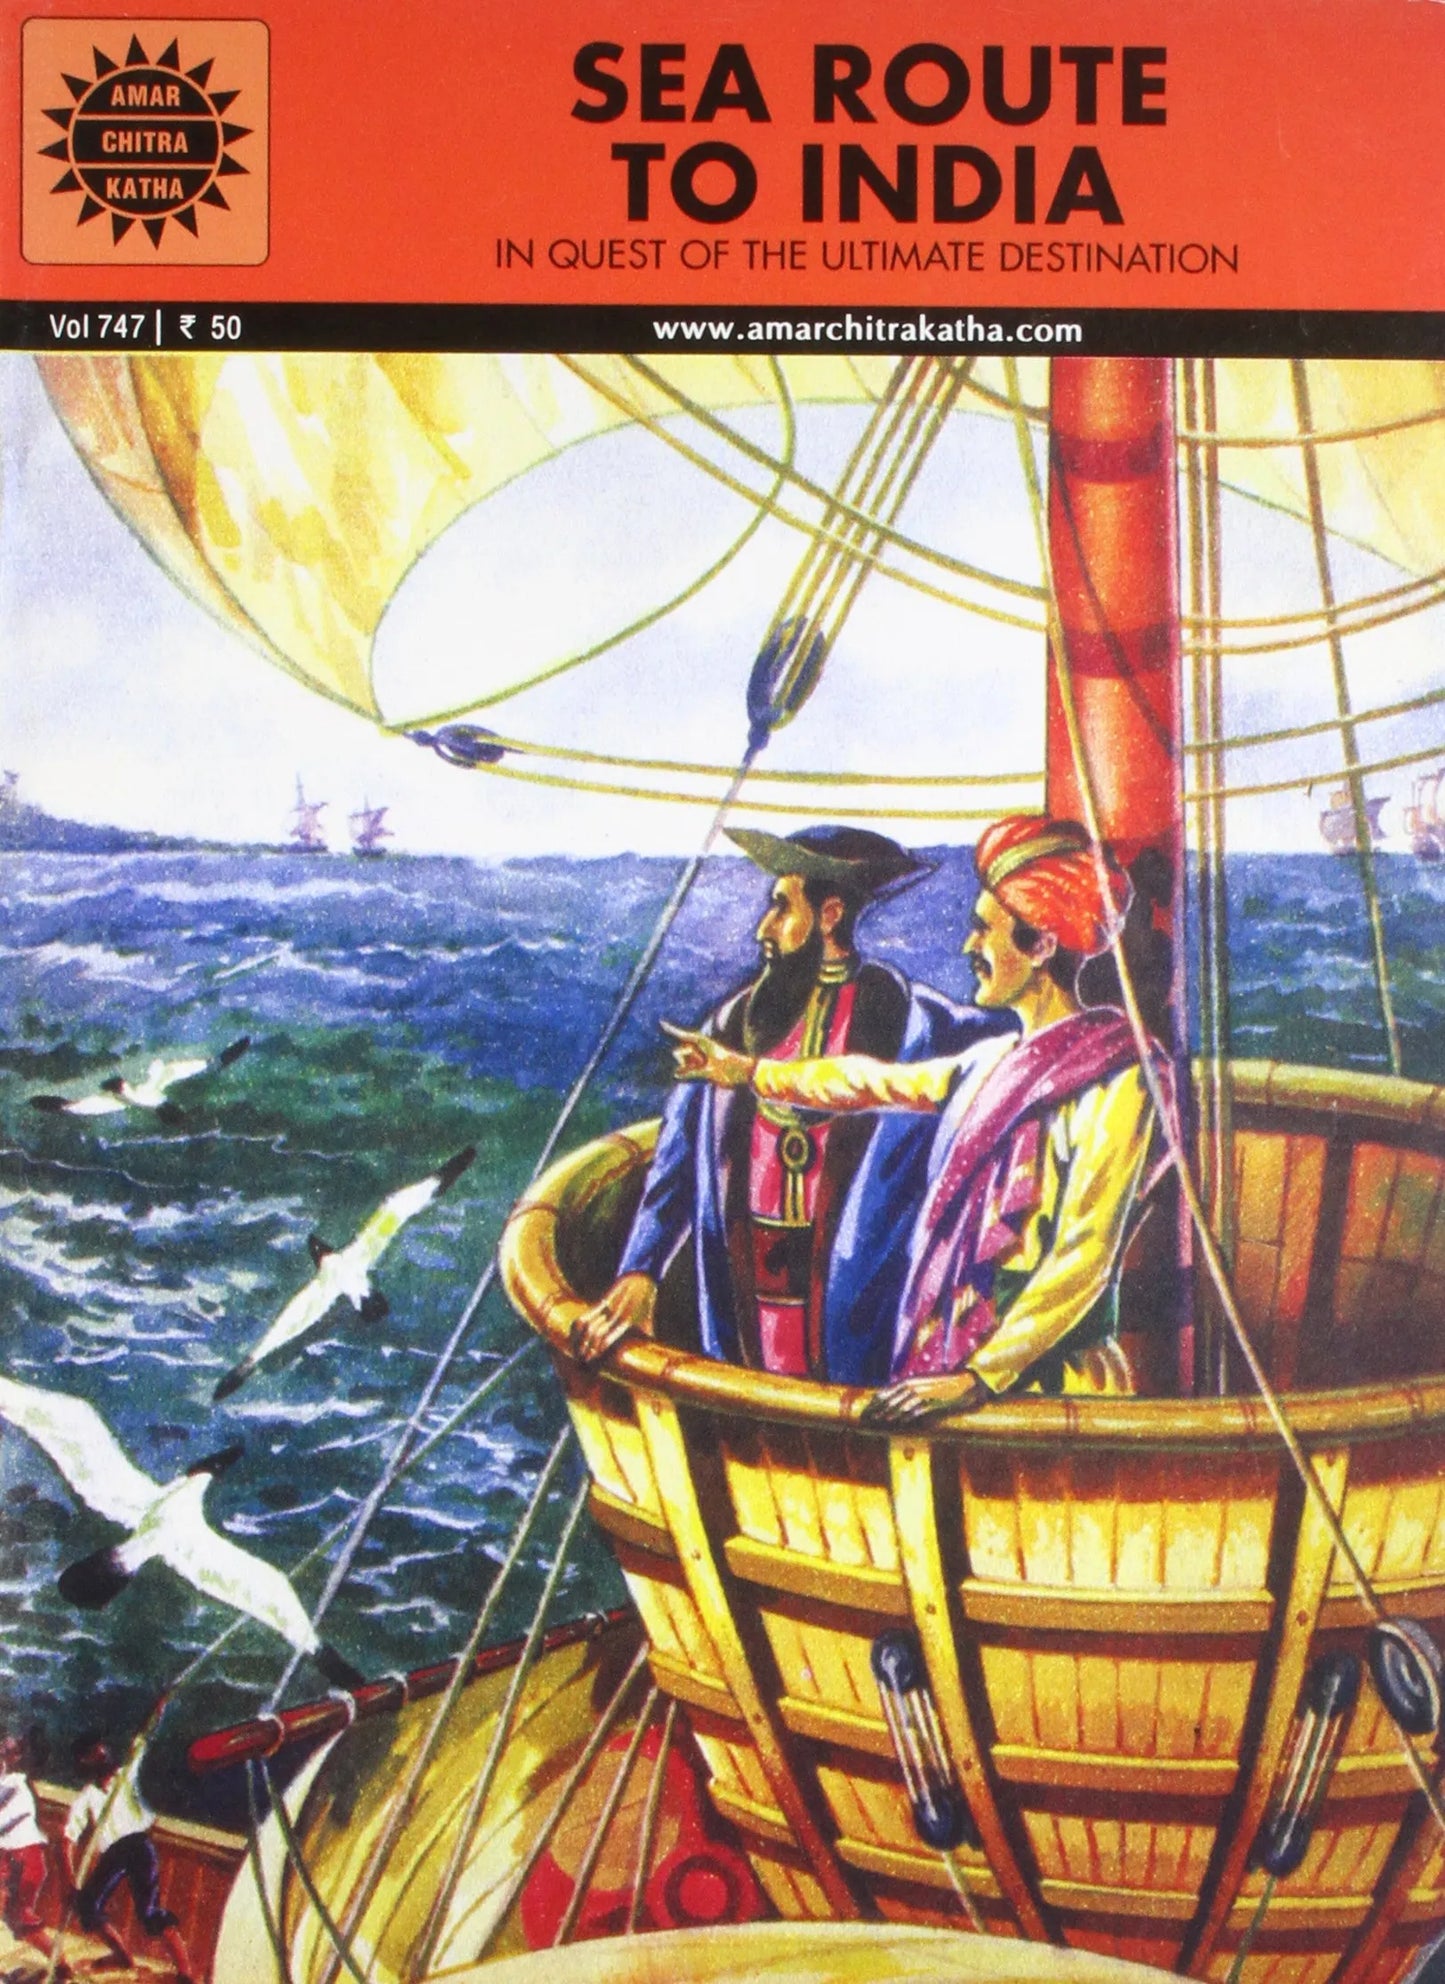 Amar Chitra Katha - Sea Route to India - In Quest of the Ultimate Destination